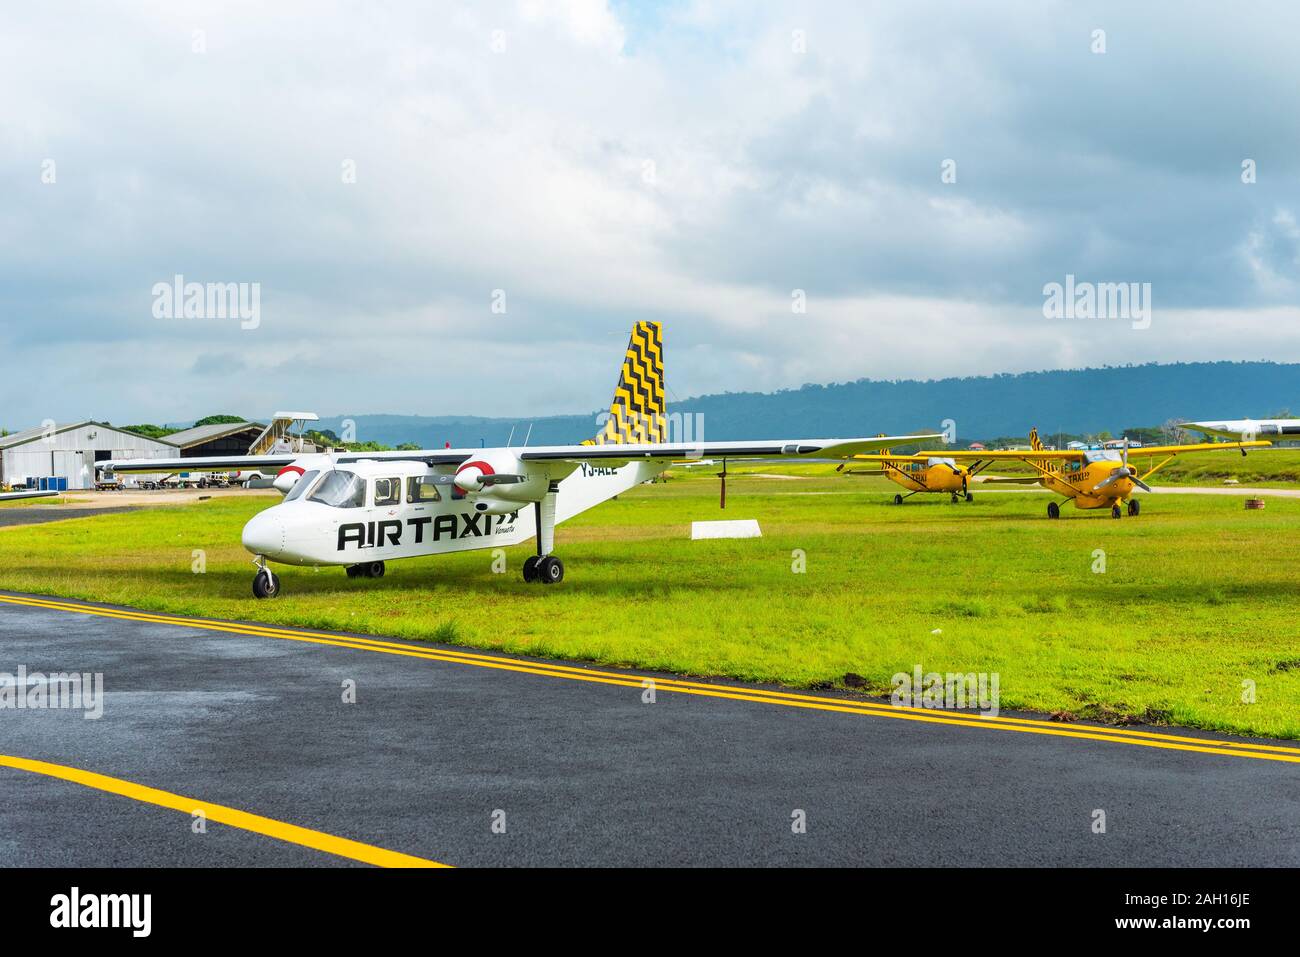 PORTVILA, VANUATU - JULY 19, 2019: Airplanes at the airport against the backdrop of a mountain landscape. Copy space for text Stock Photo